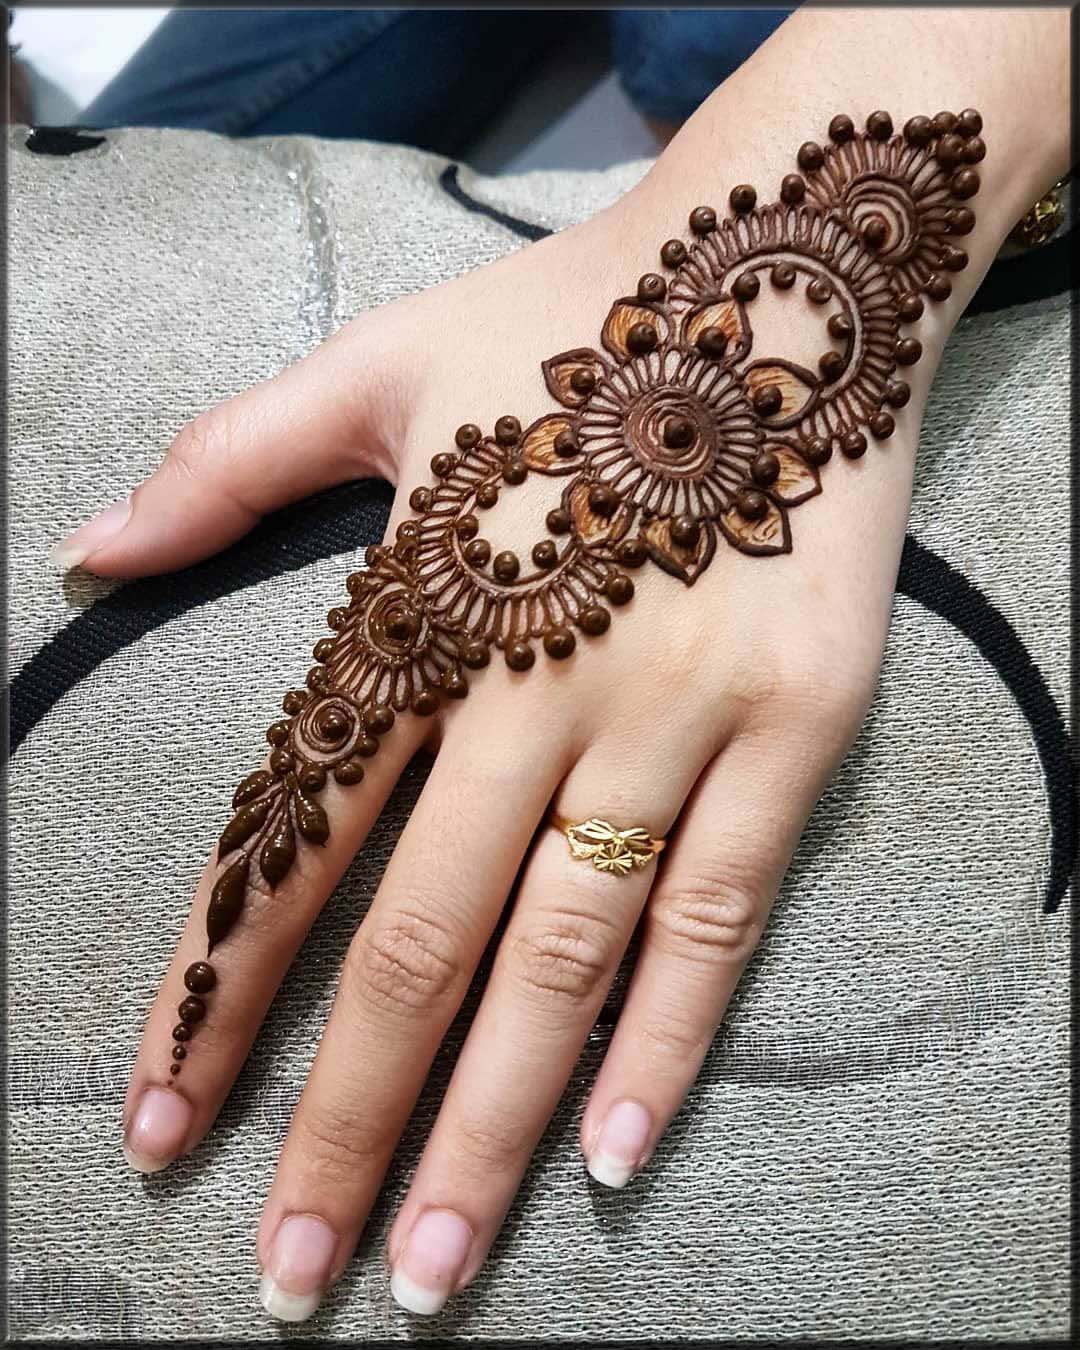 30+ Simple Mehndi Designs Step By Step Tutorials for Beginners - K4 Fashion